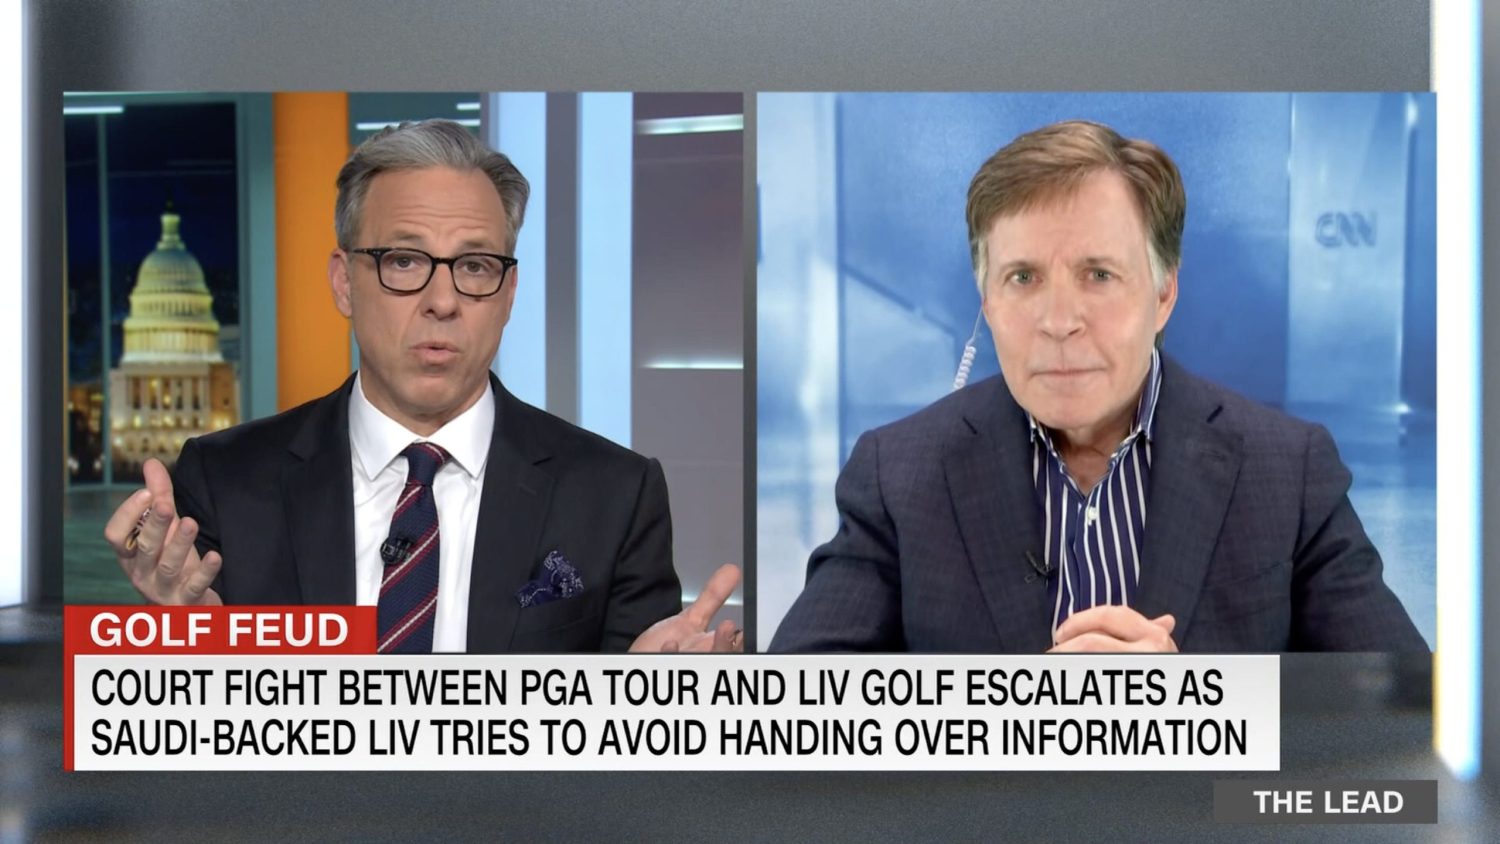 Jake Tapper and Bob Costas discussing LIV Golf on CNN